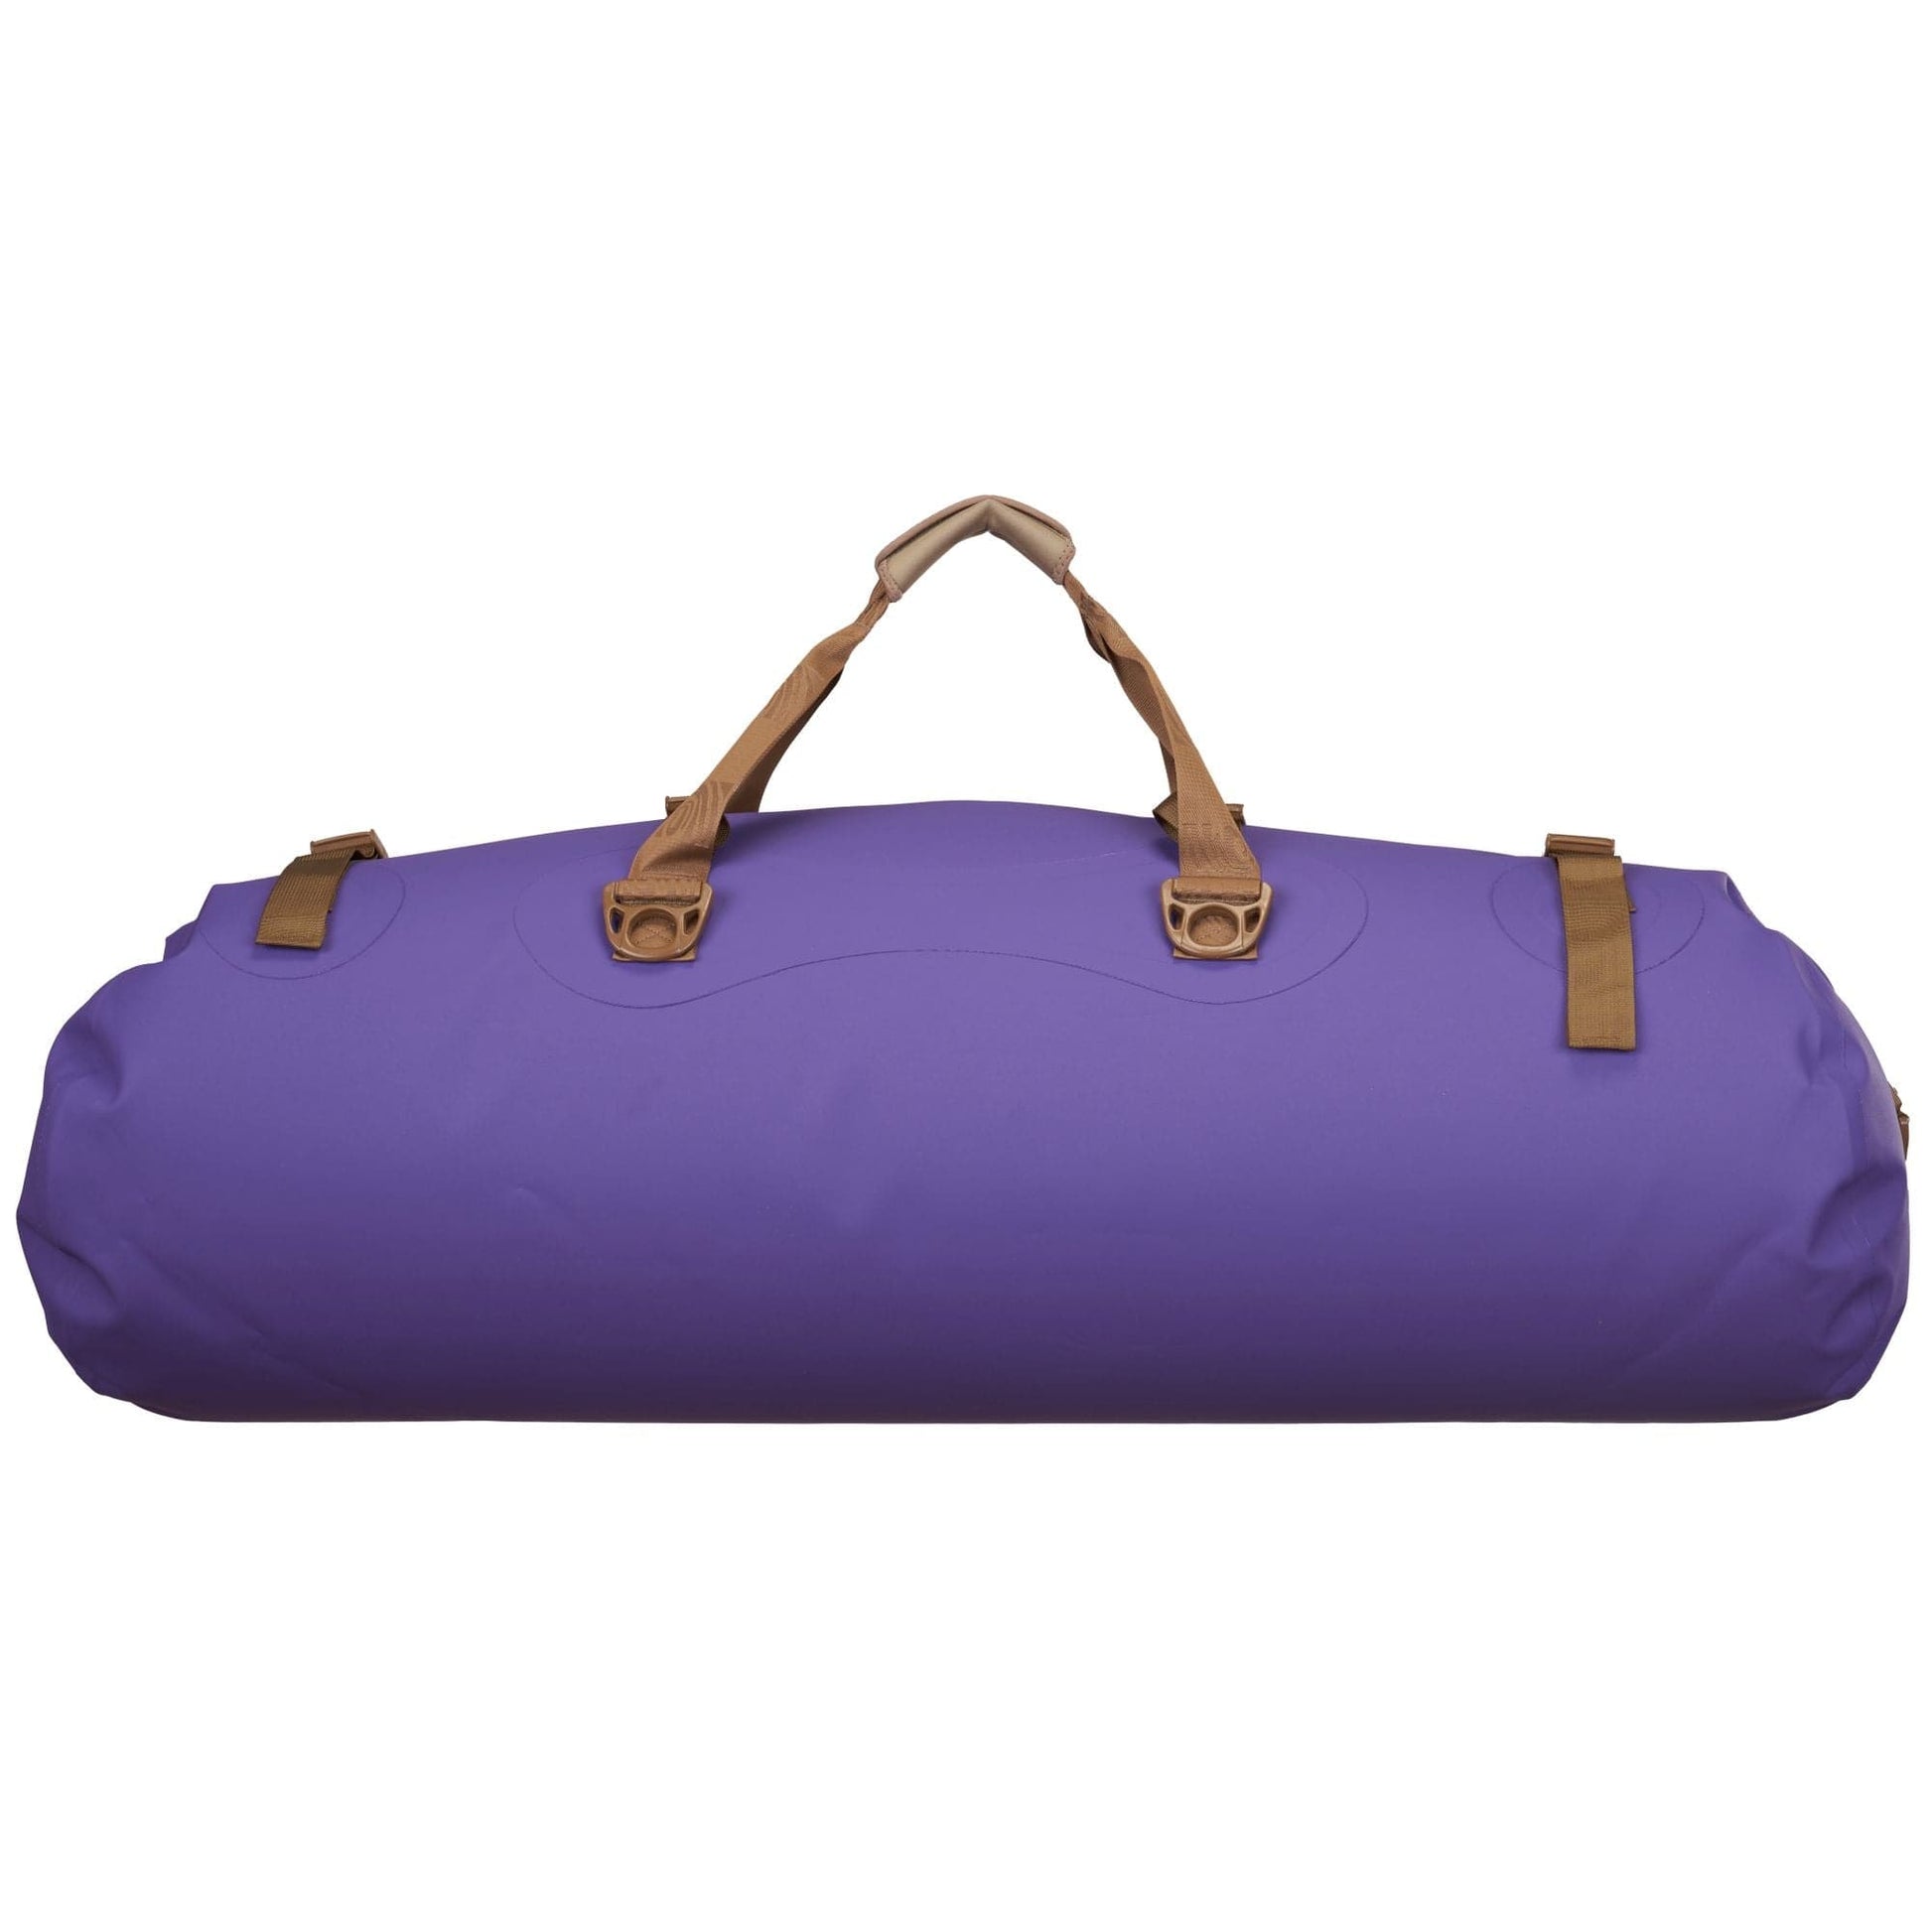 Featuring the Mississippi Duffel dry bag manufactured by Watershed shown here from a fourth angle.